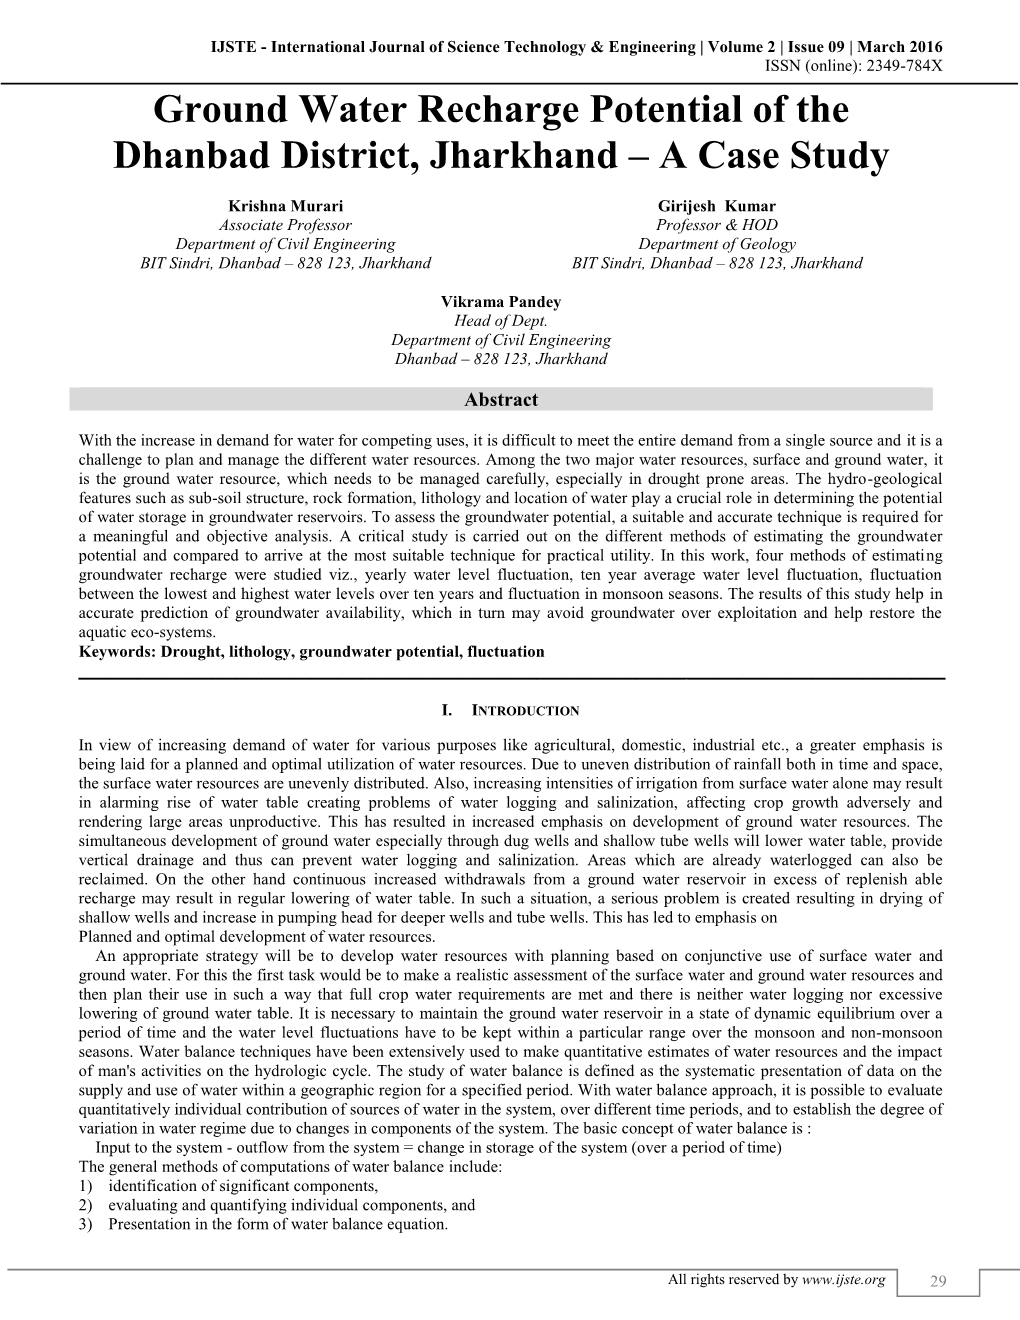 Ground Water Recharge Potential of the Dhanbad District, Jharkhand – a Case Study (IJSTE/ Volume 2 / Issue 09 / 006)